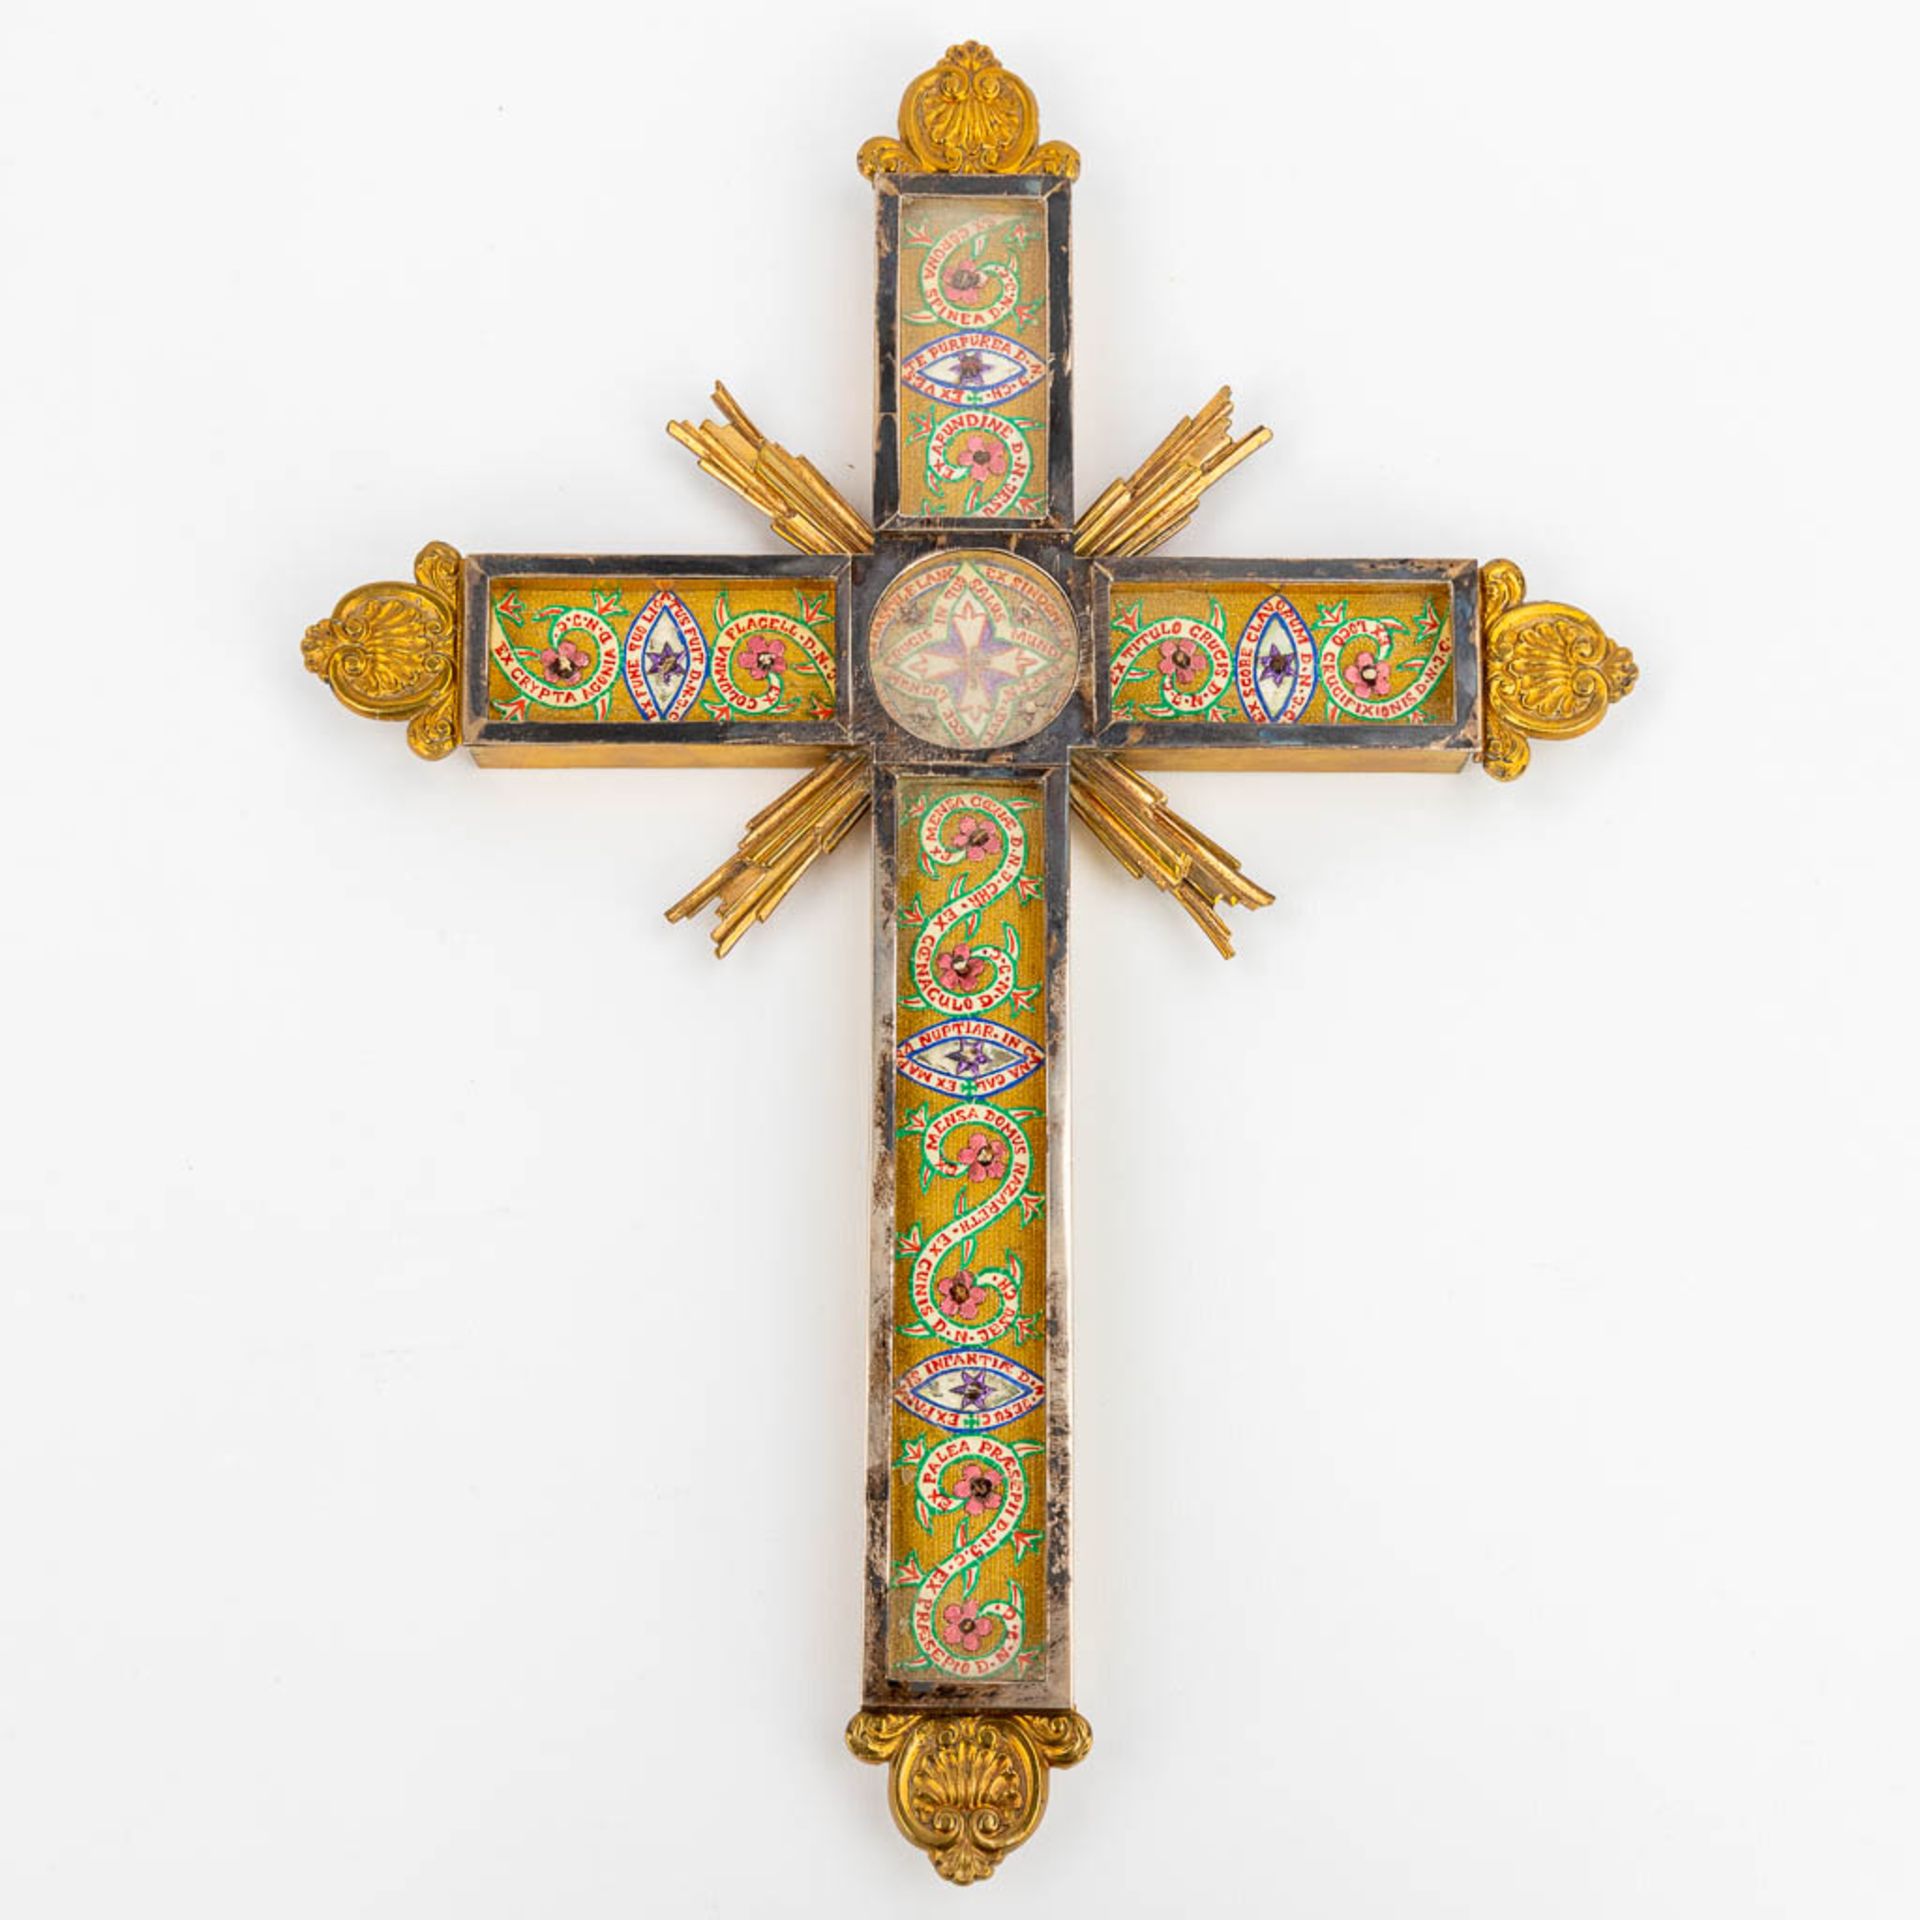 An antique reliquary box with relics a relic crucifix and embroidery. (L:13 x W:52 x H:75 cm) - Image 5 of 23